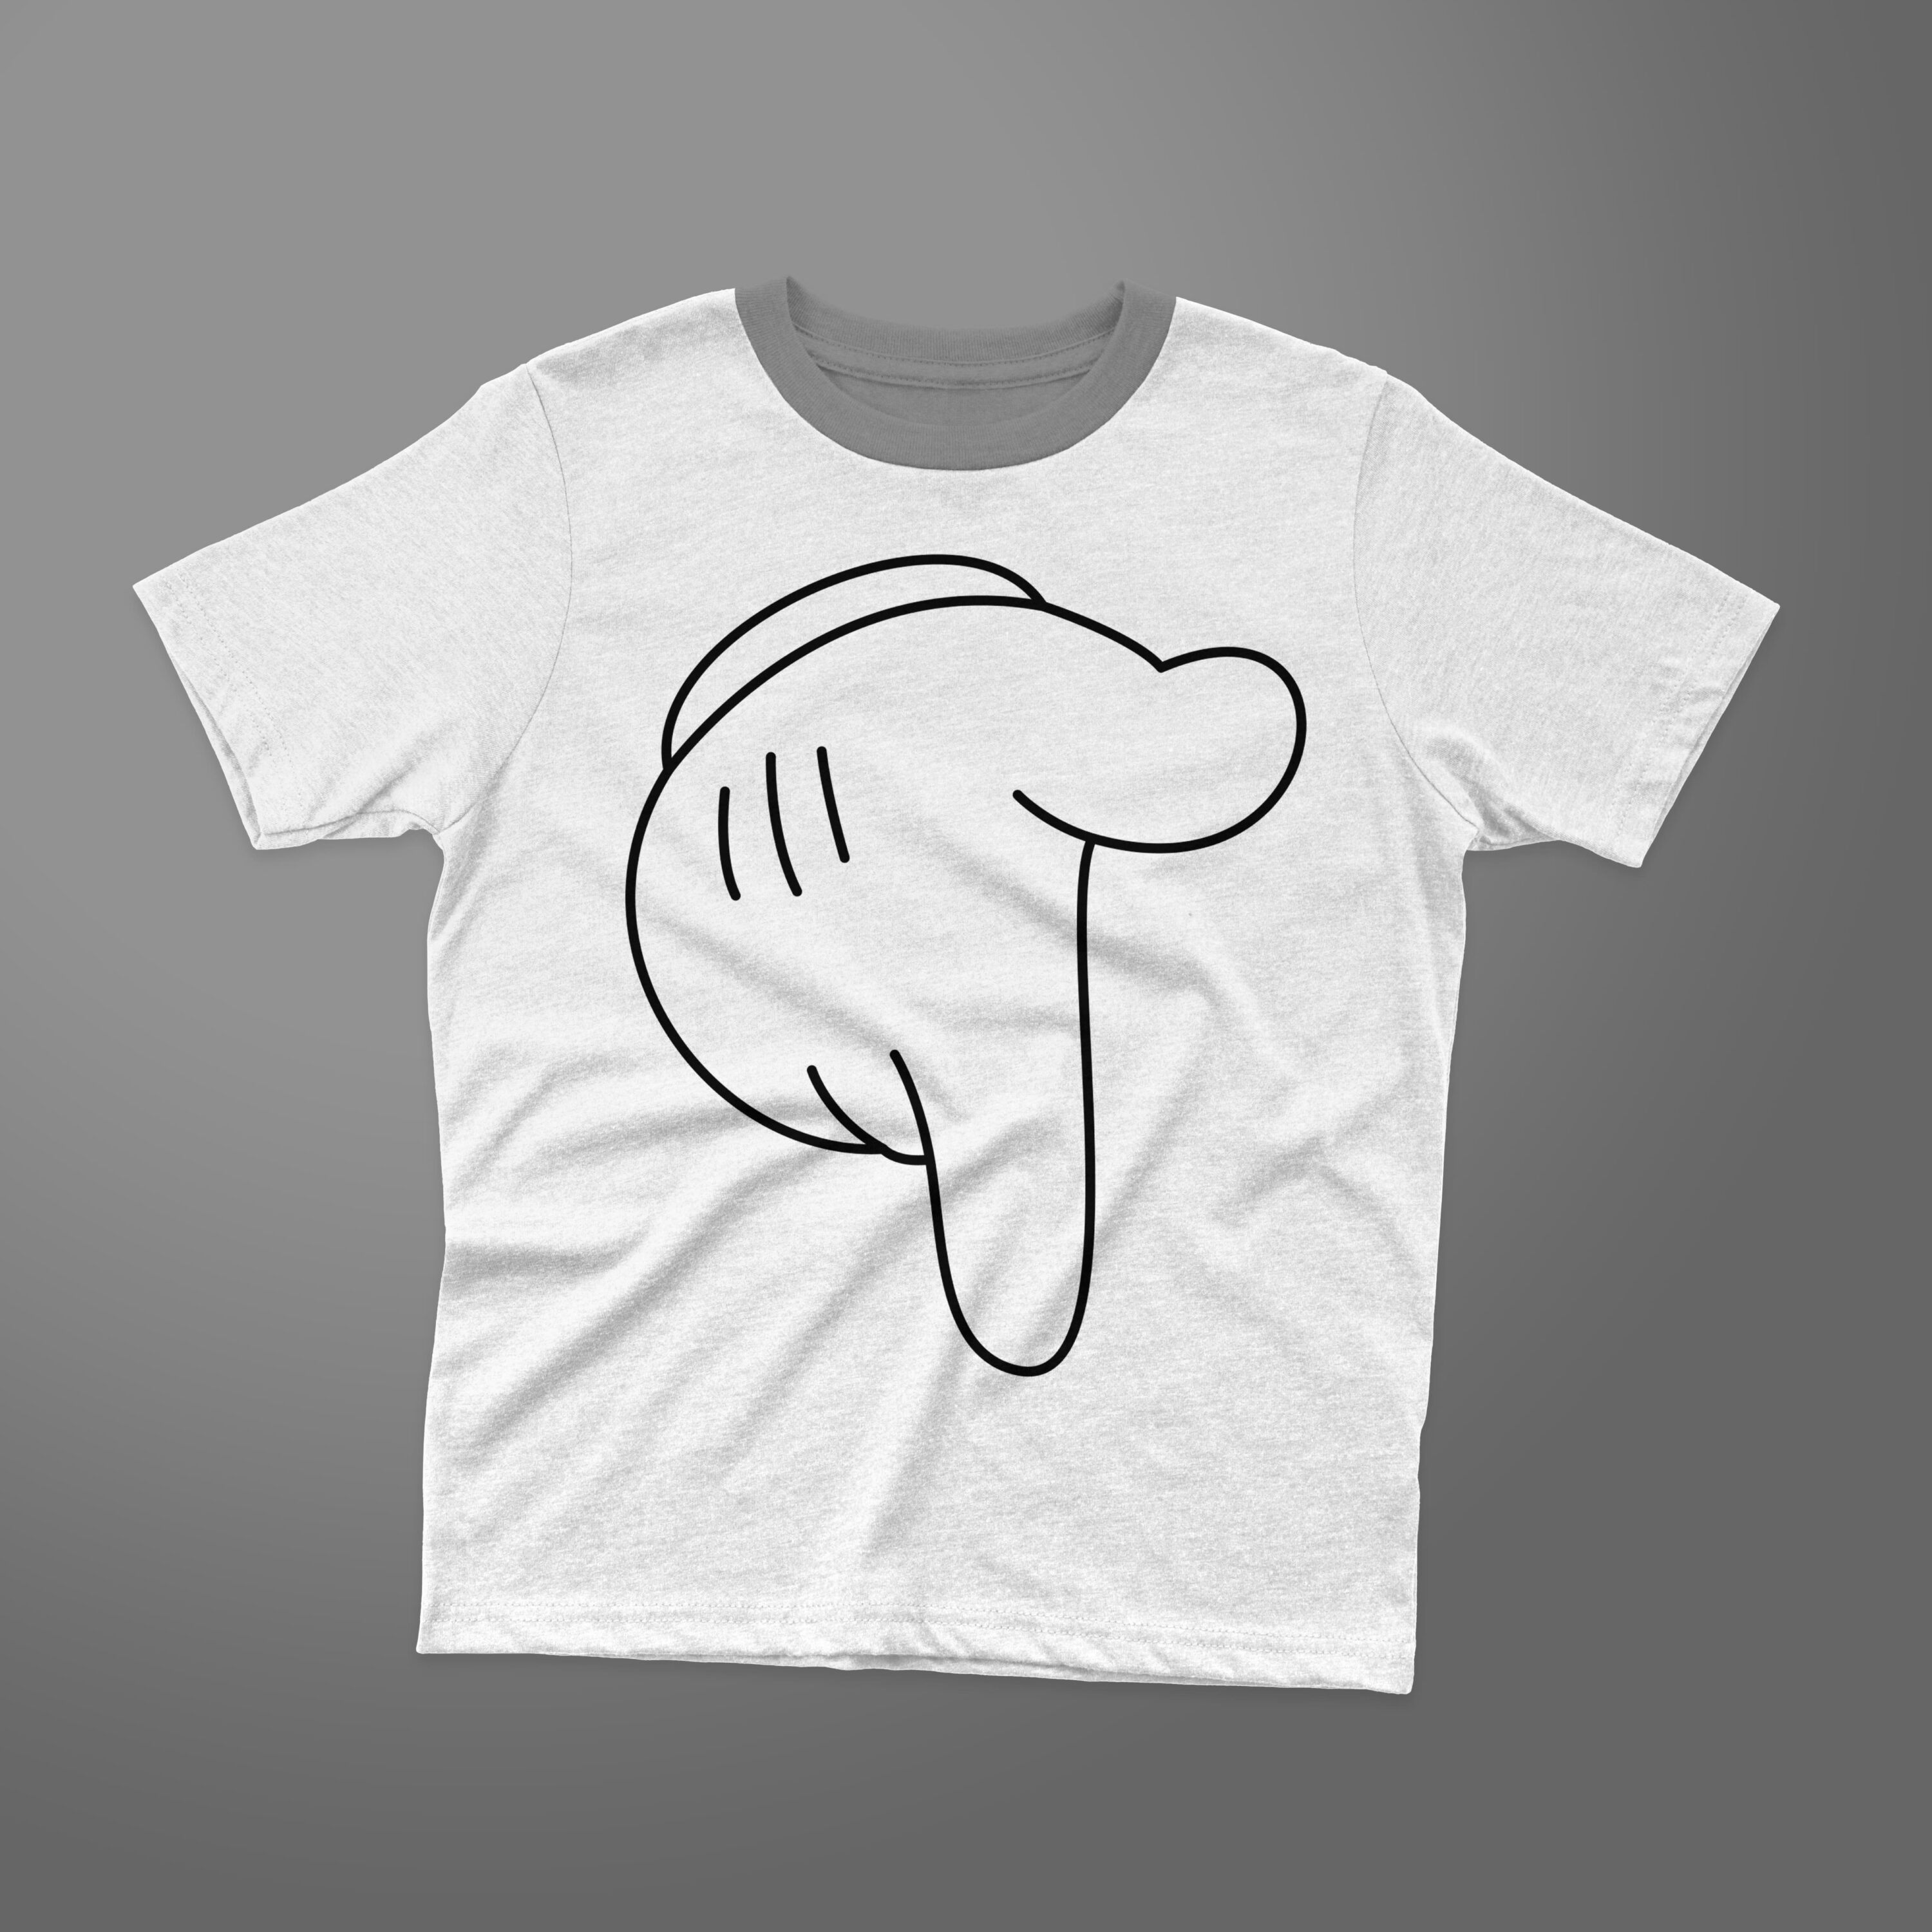 Outline mickey mouse hands on a white t-shirt.